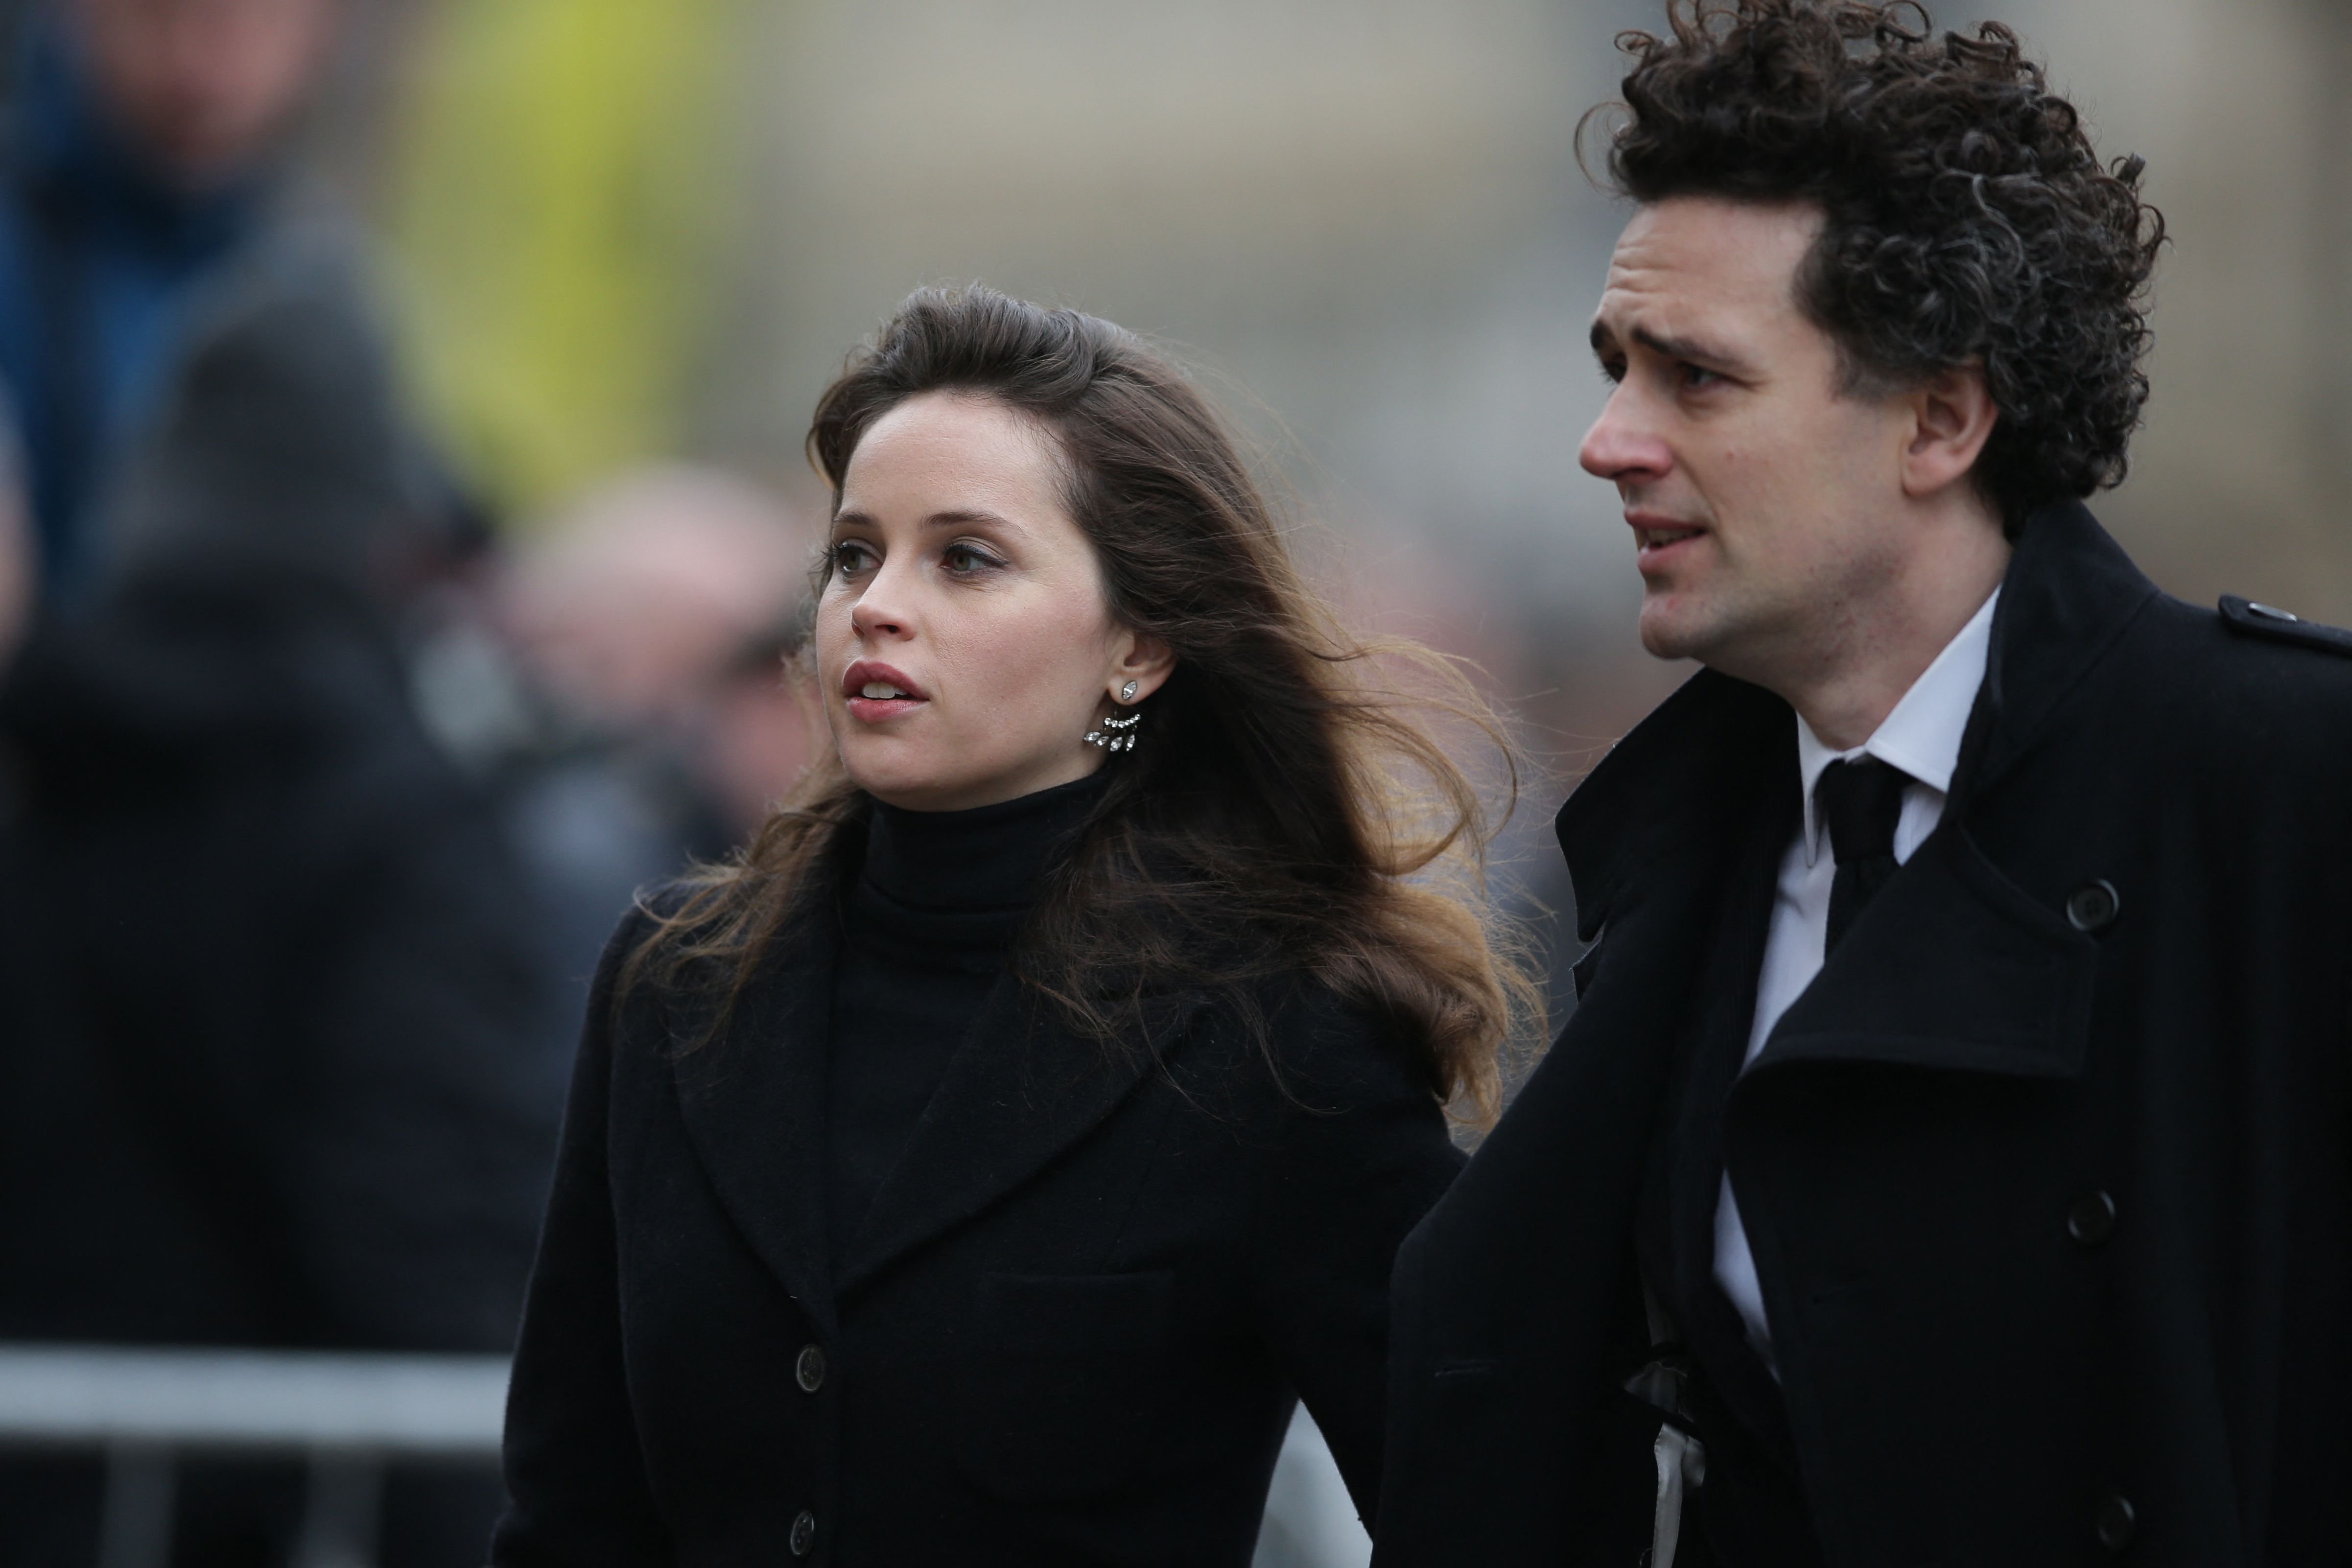 Felicity Jones and Charles Guard at the funeral of British scientist Stephen Hawking in Cambridge on March 31, 2018. | Source: Getty Images 